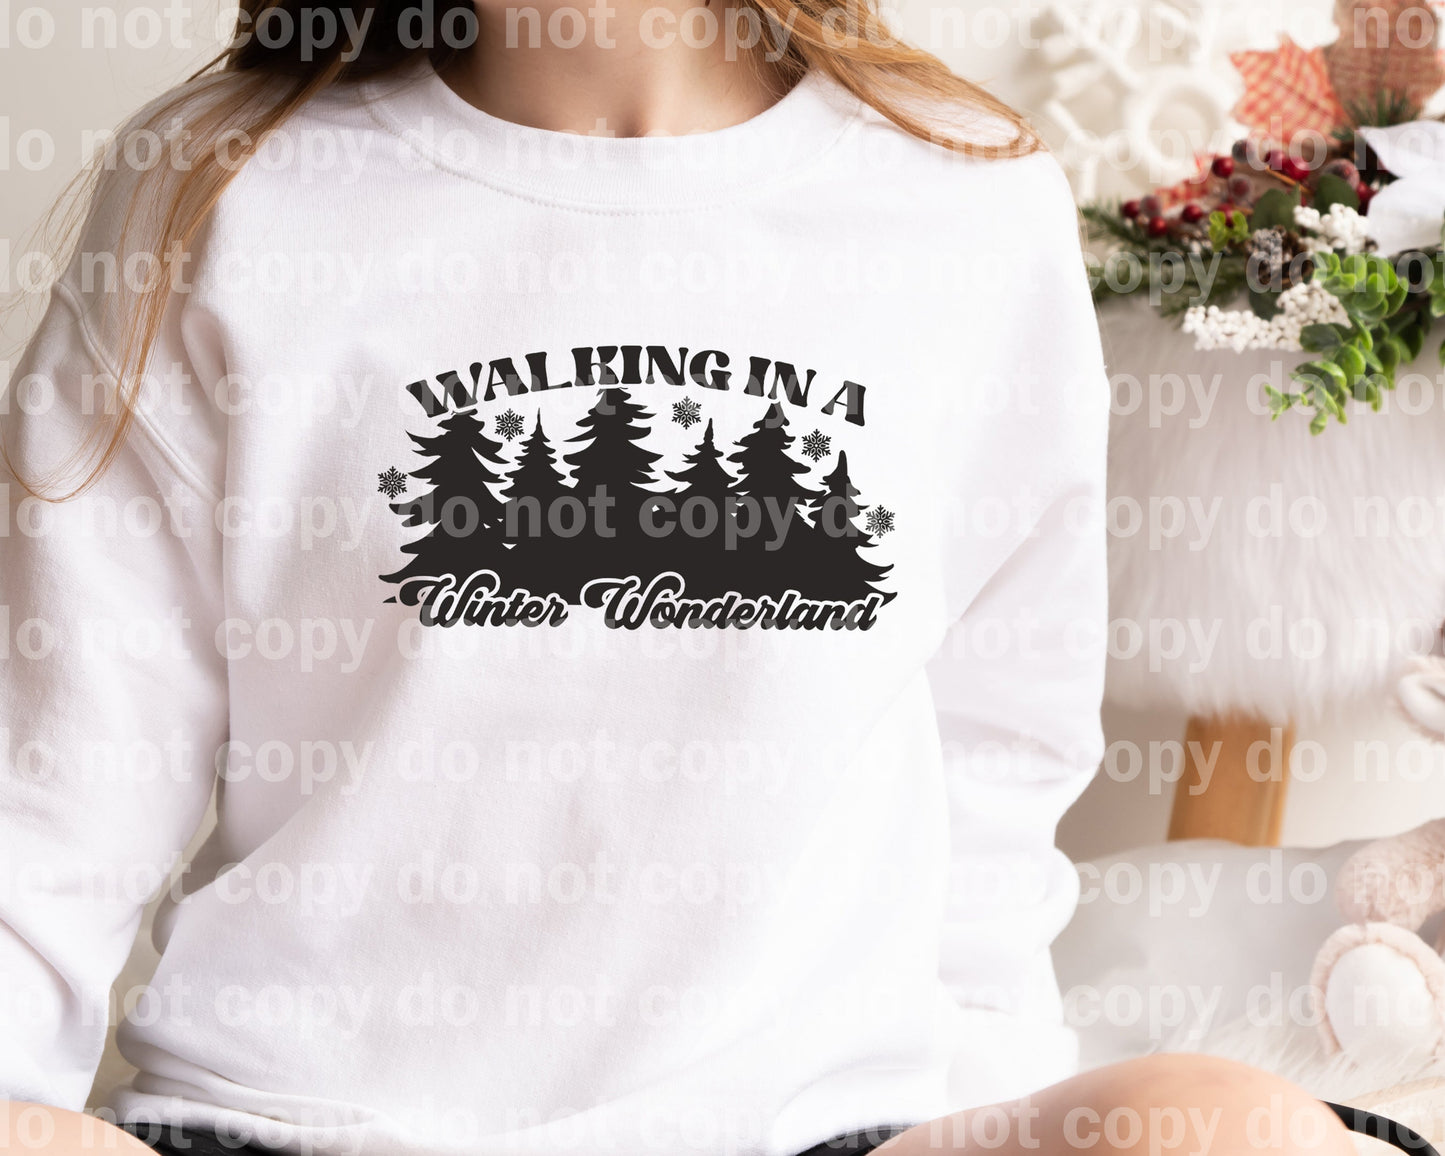 Walking In A Winter Wonderland Dream Print or Sublimation Print